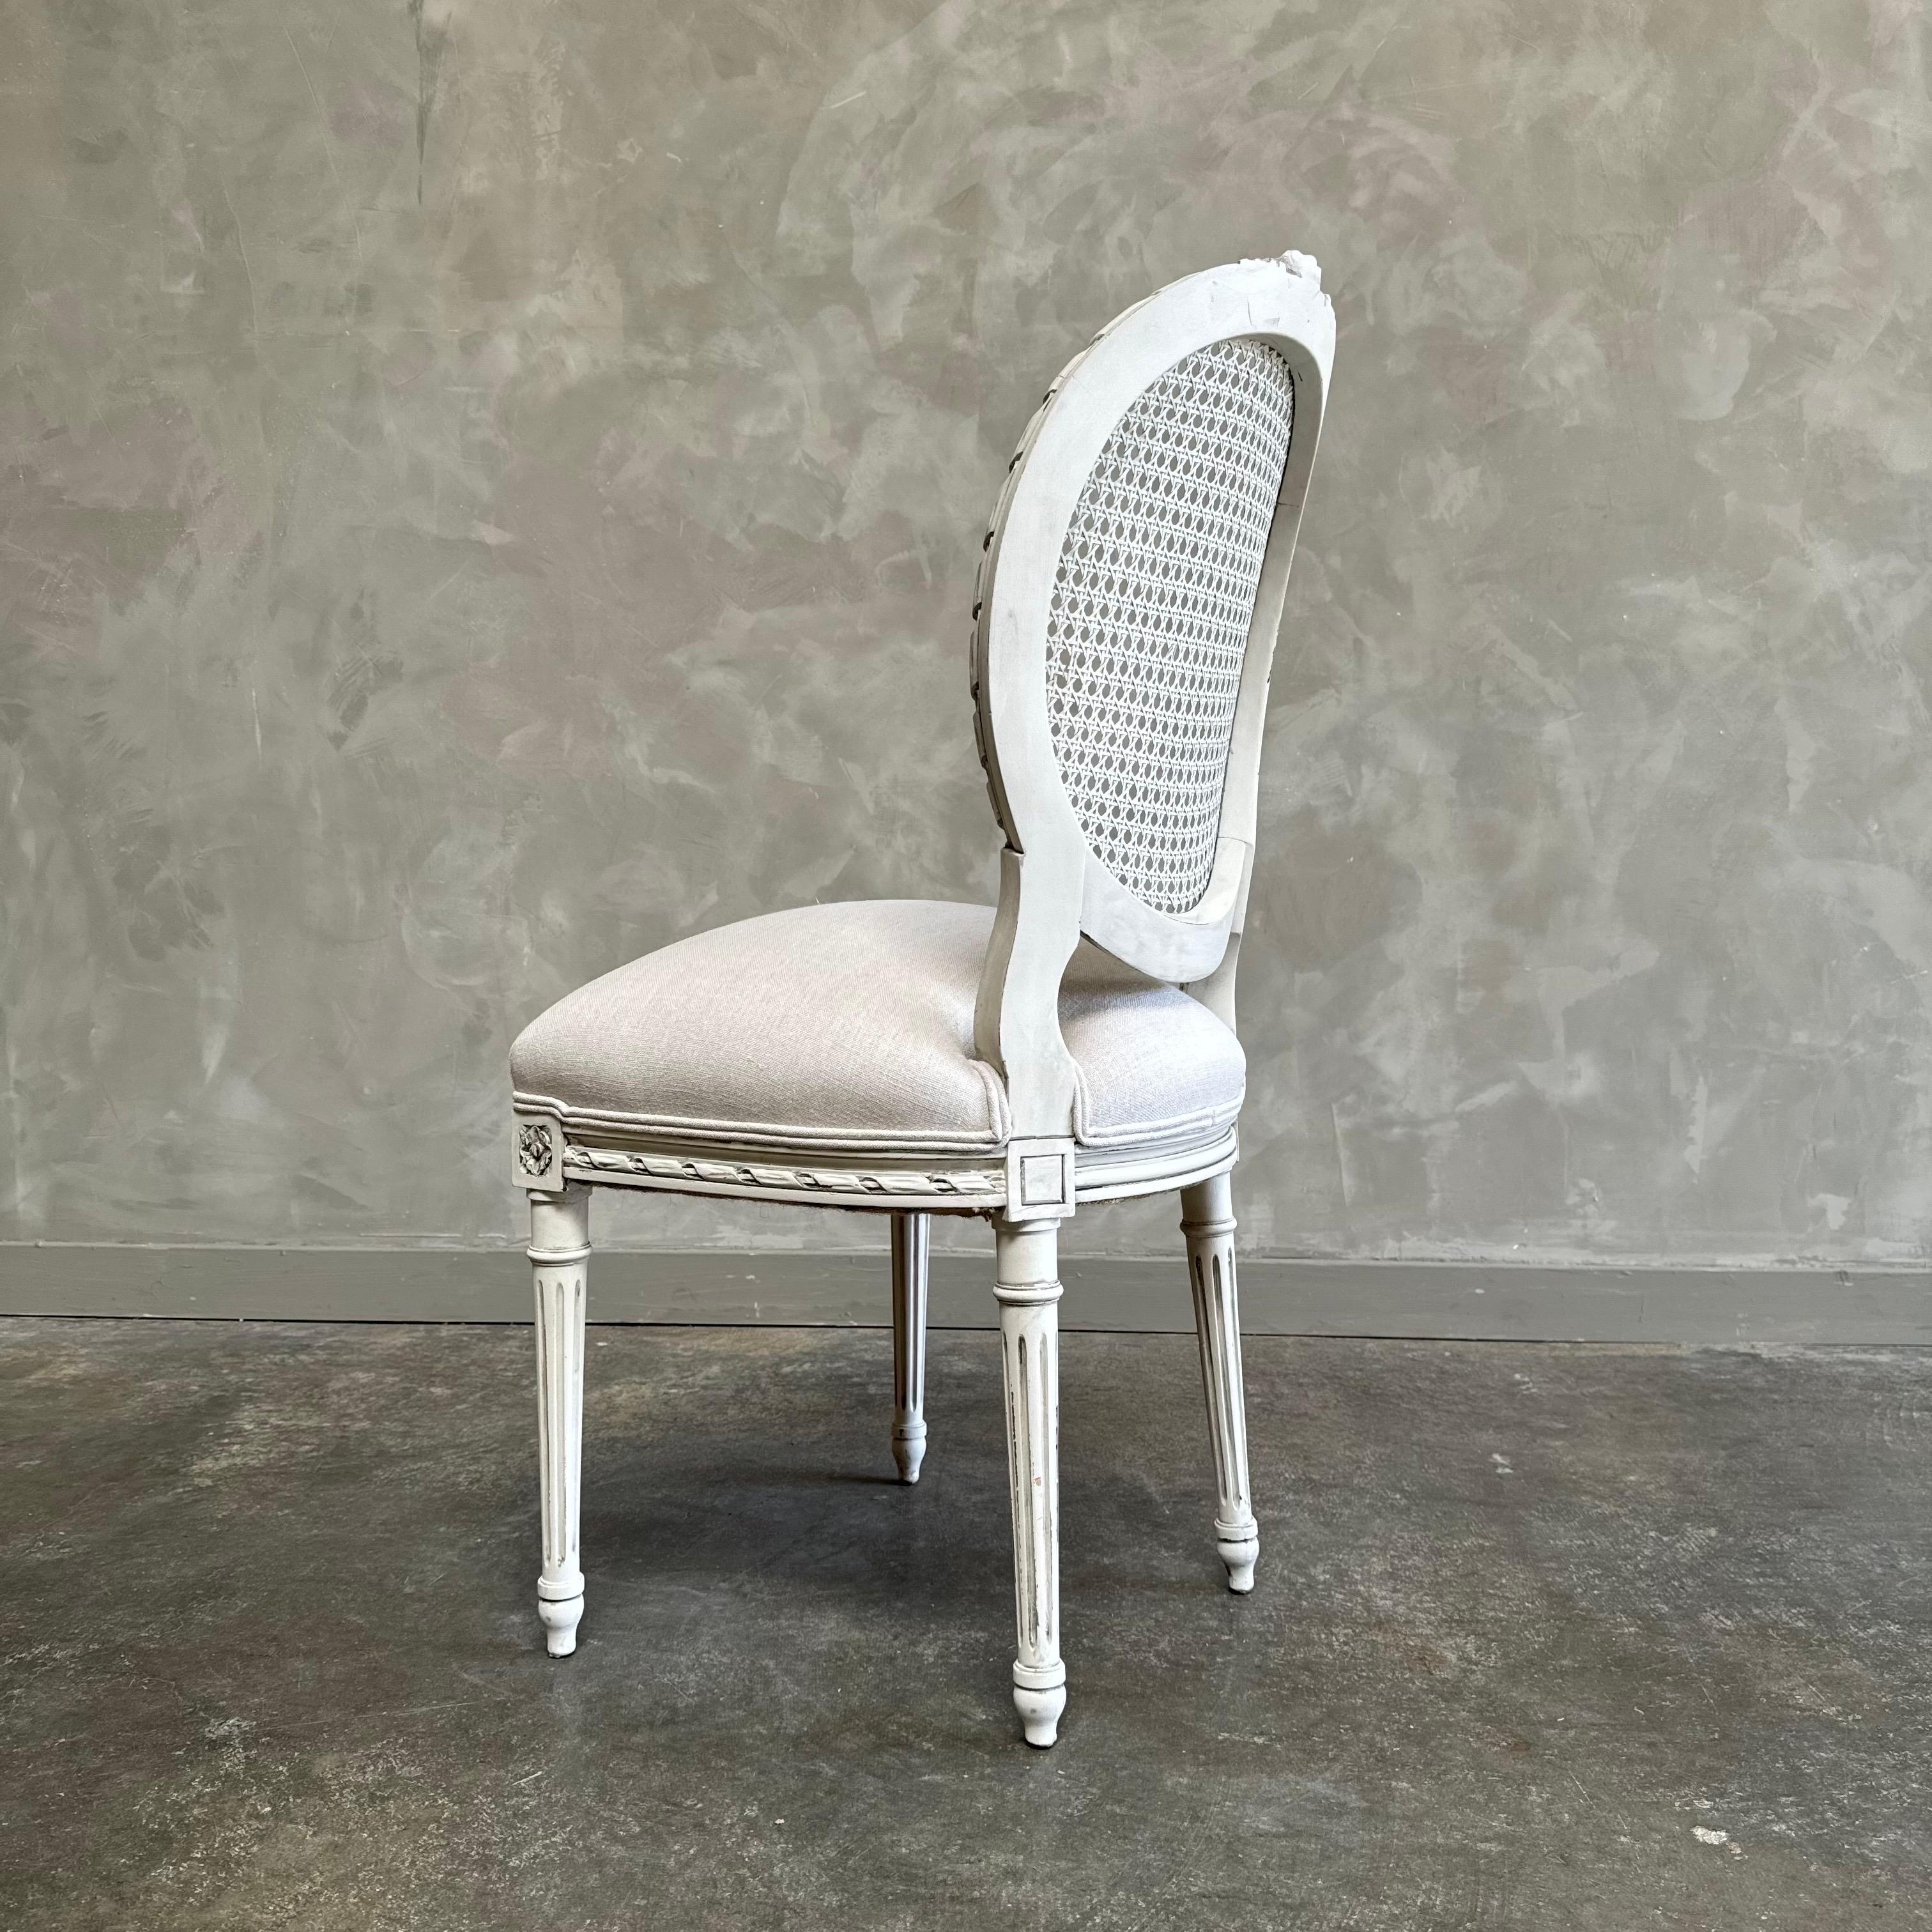 Antique Louis XVI Style French cane back chair in Oyster White Finish For Sale 1